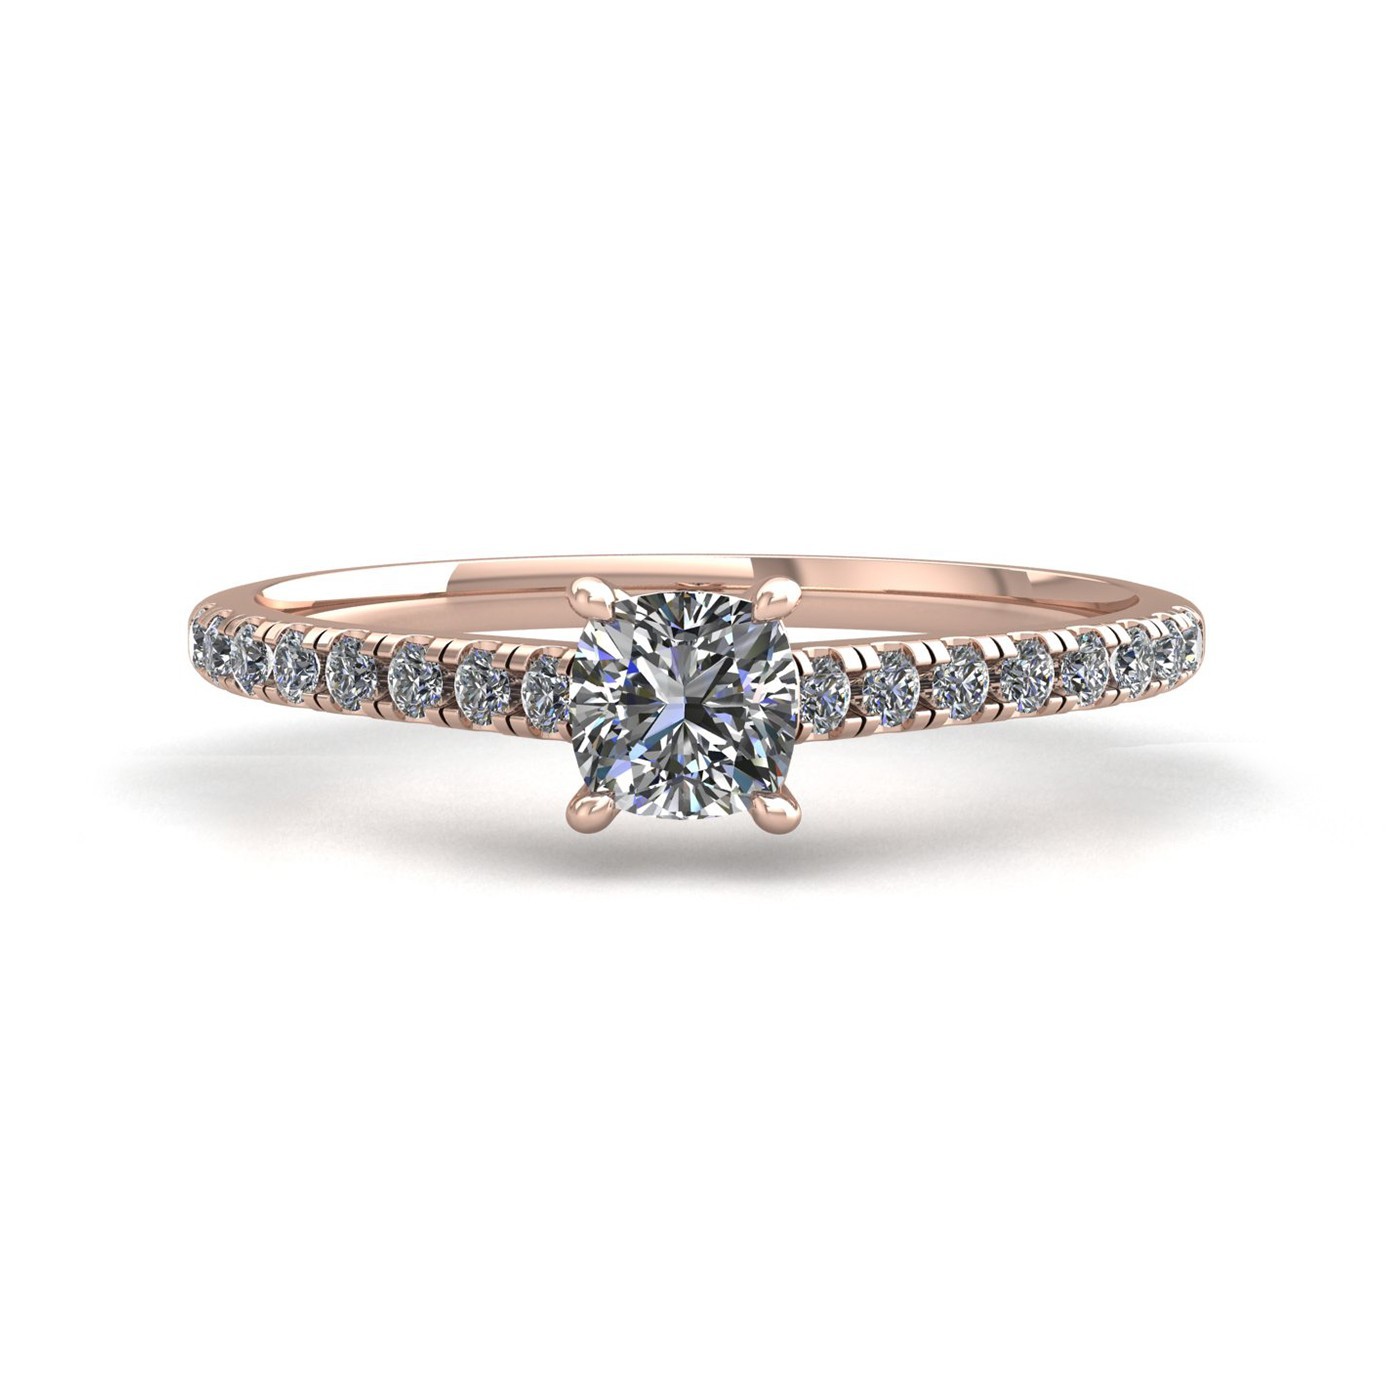 18k rose gold 2.0ct 4 prongs cushion cut diamond engagement ring with whisper thin pavÉ set band Photos & images